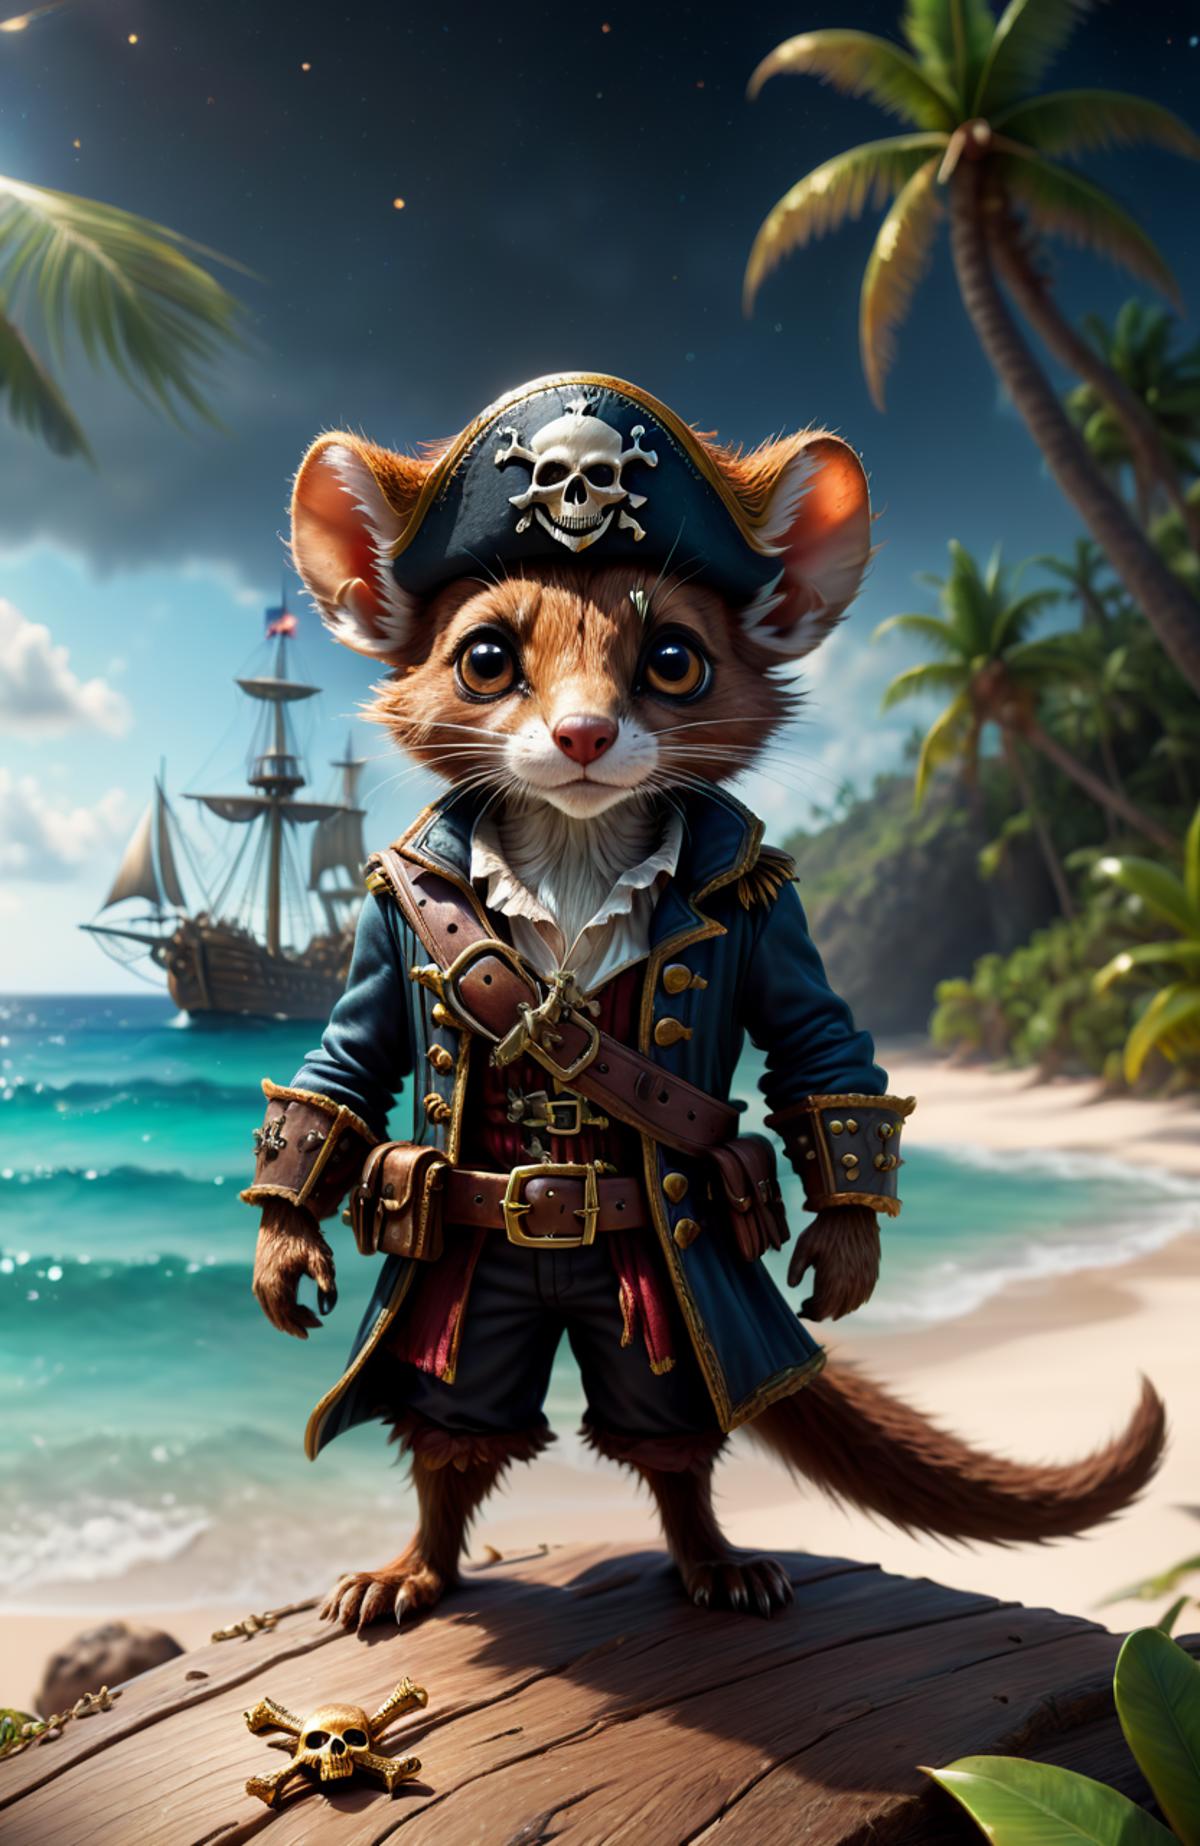 A Cartoon Pirate Mouse with a Sword on a Beach.